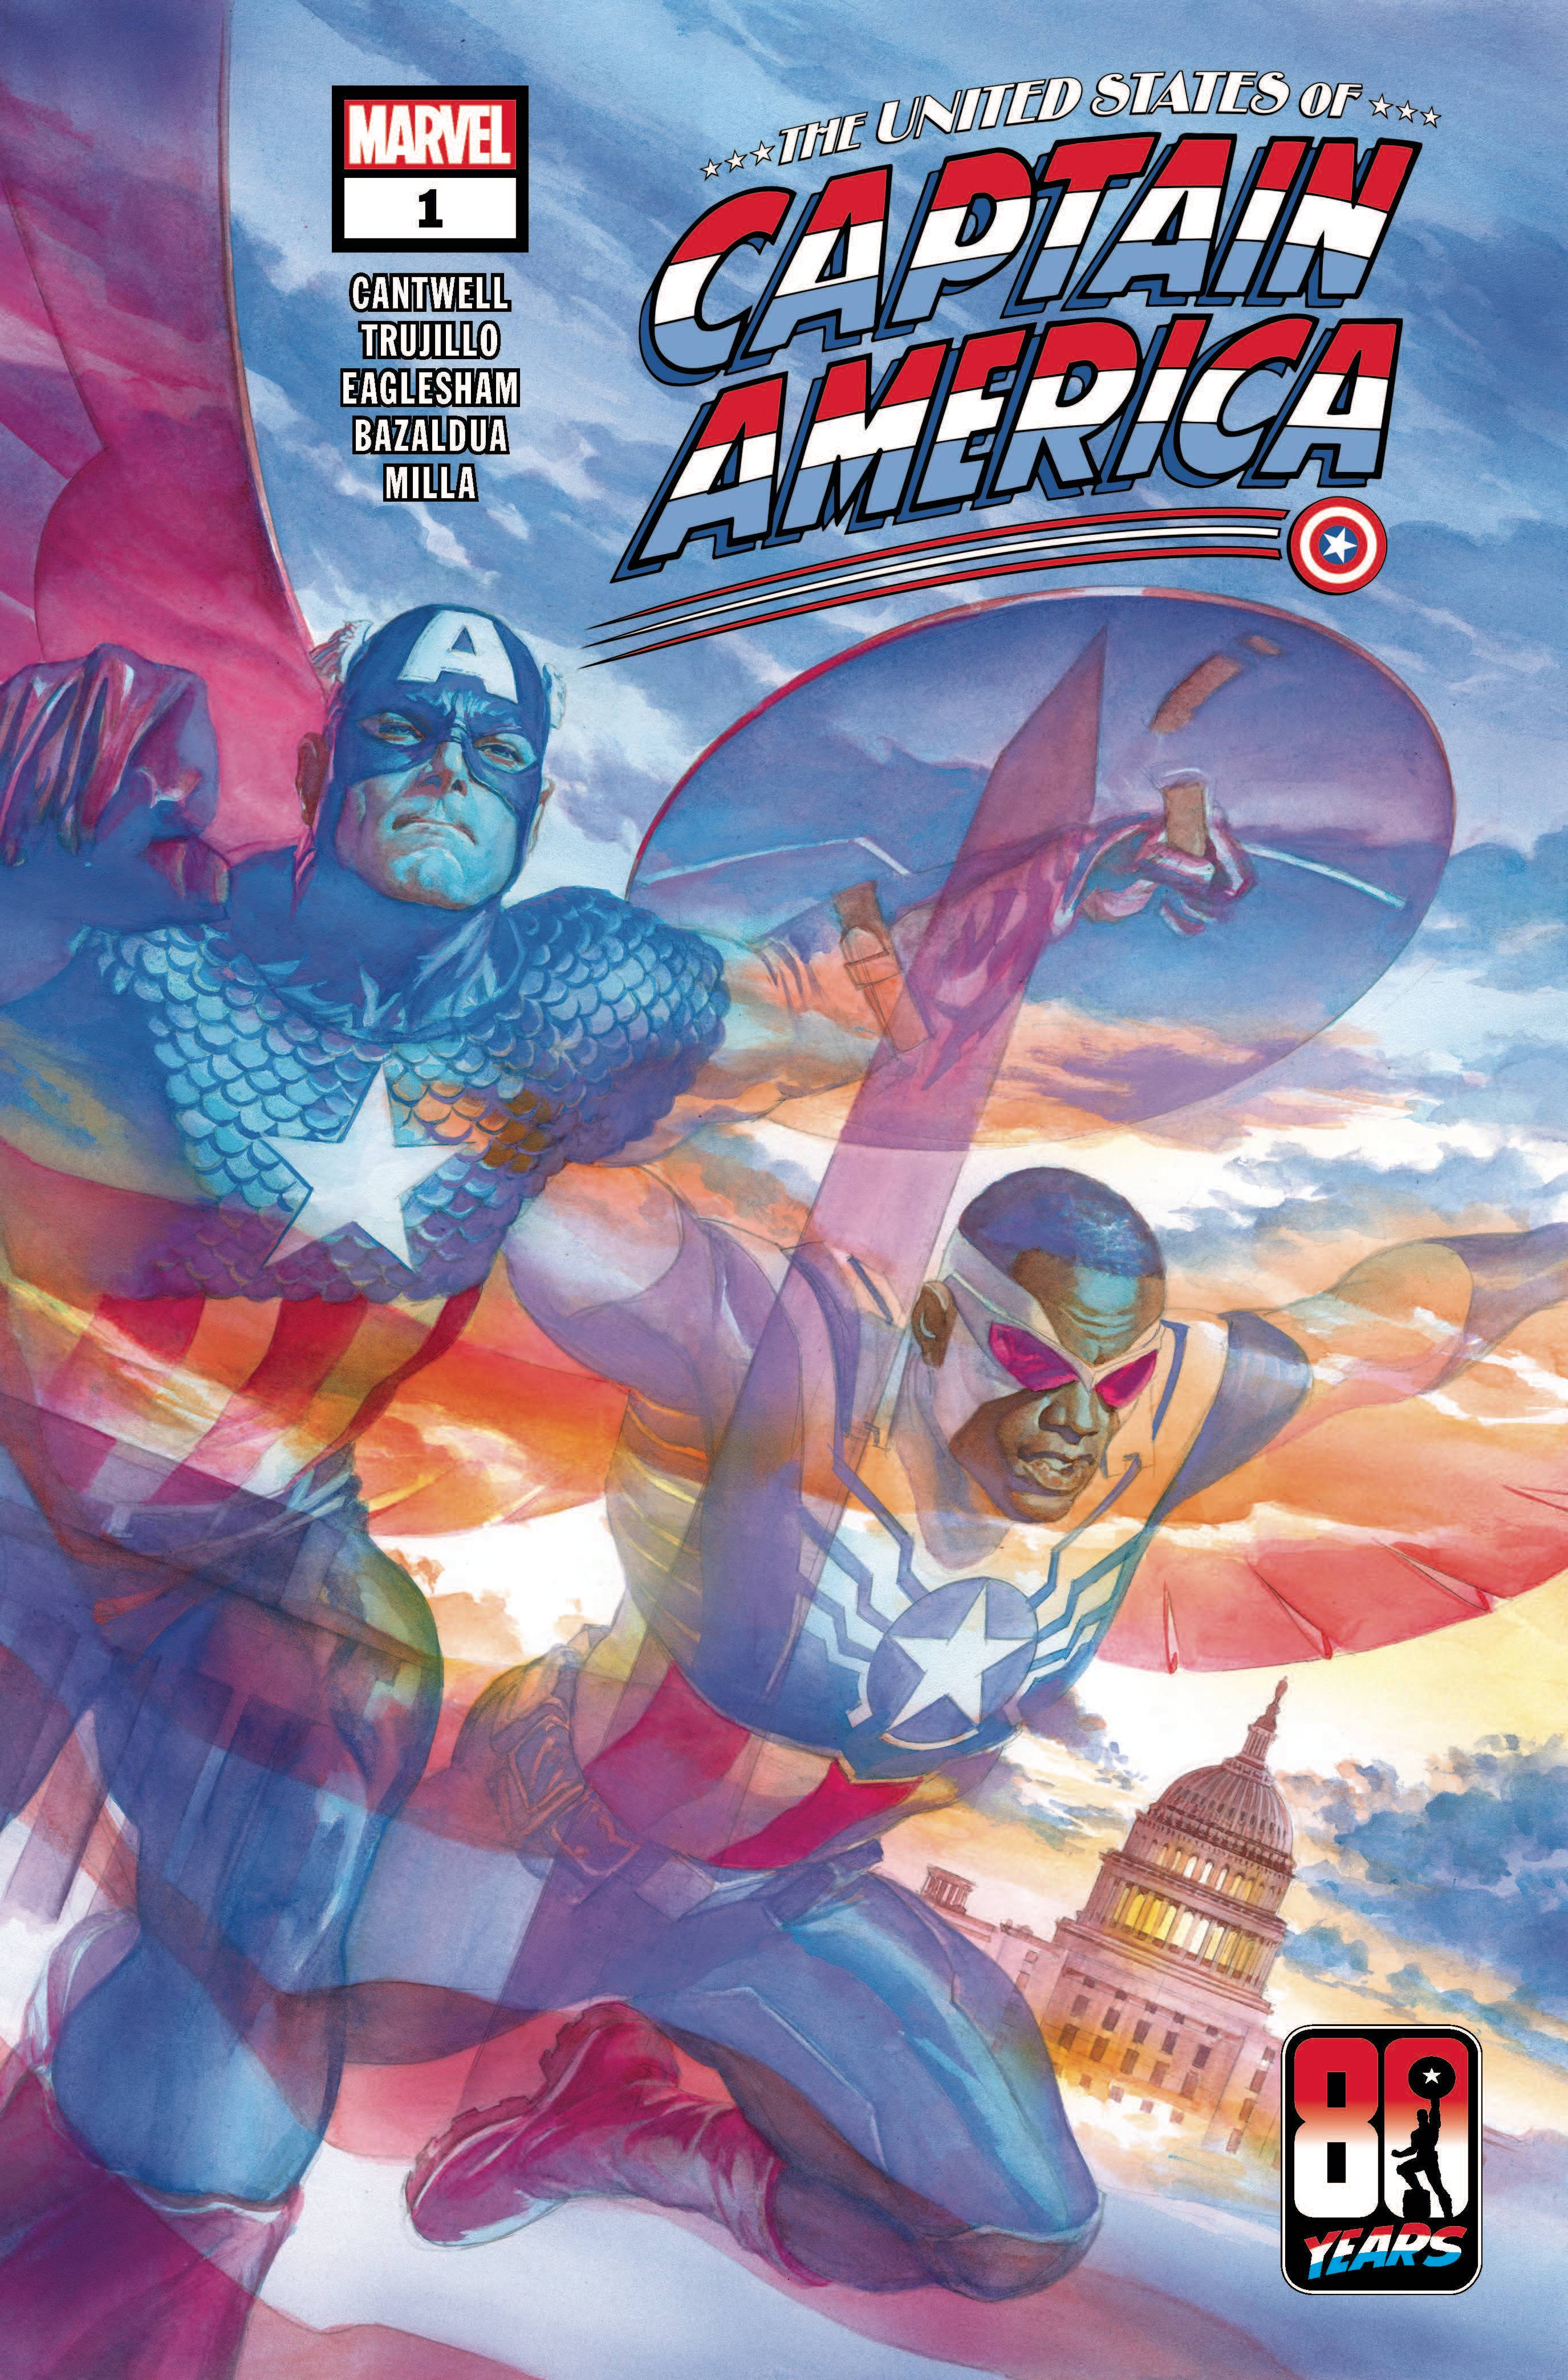 United States of Captain America #1 (Of 5)